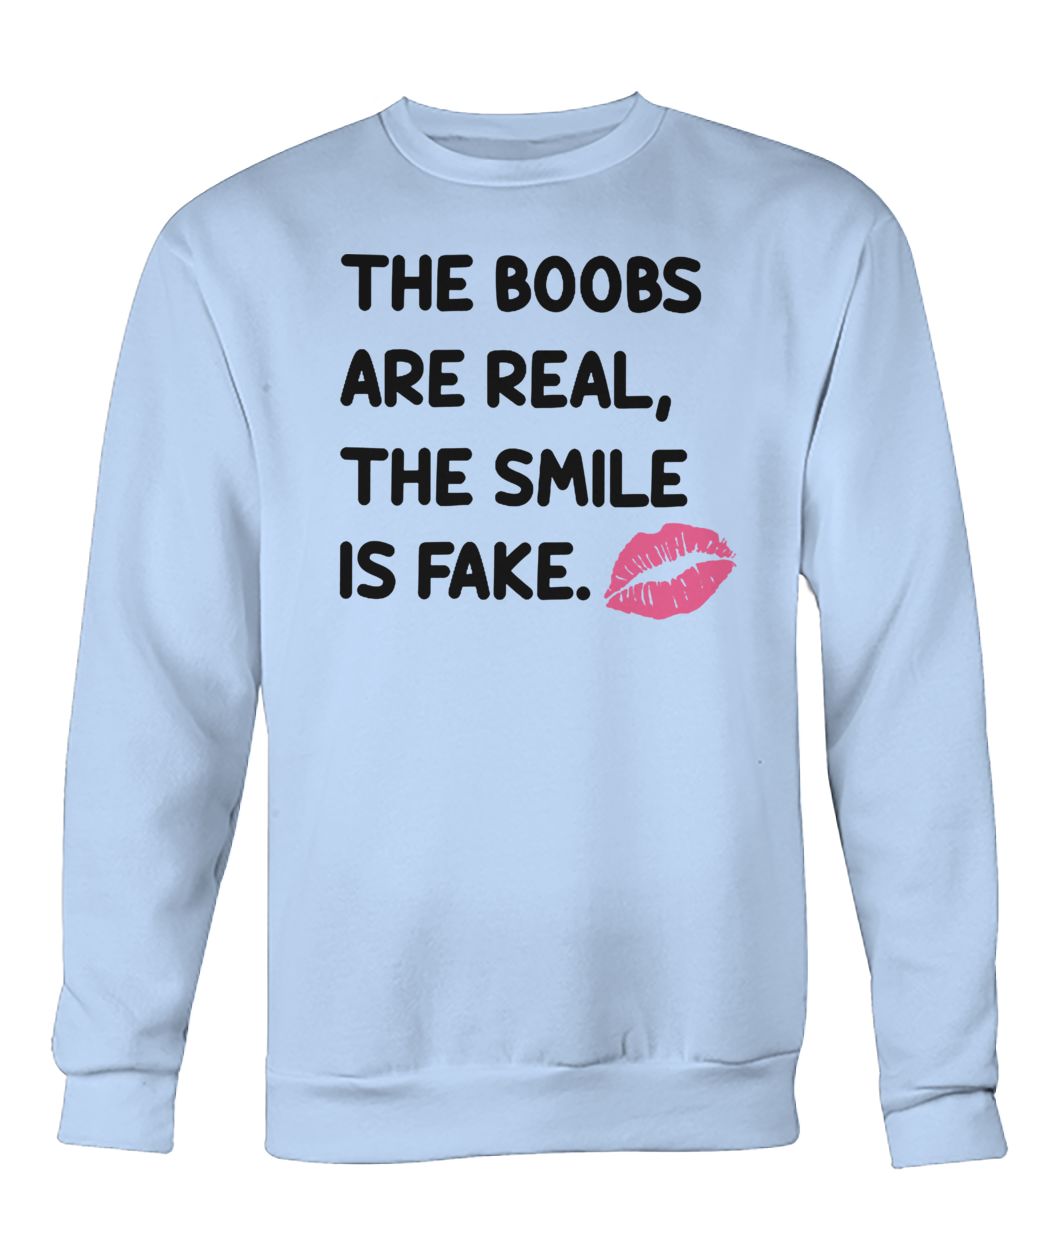 The boobs are real the smile is fake crew neck sweatshirt